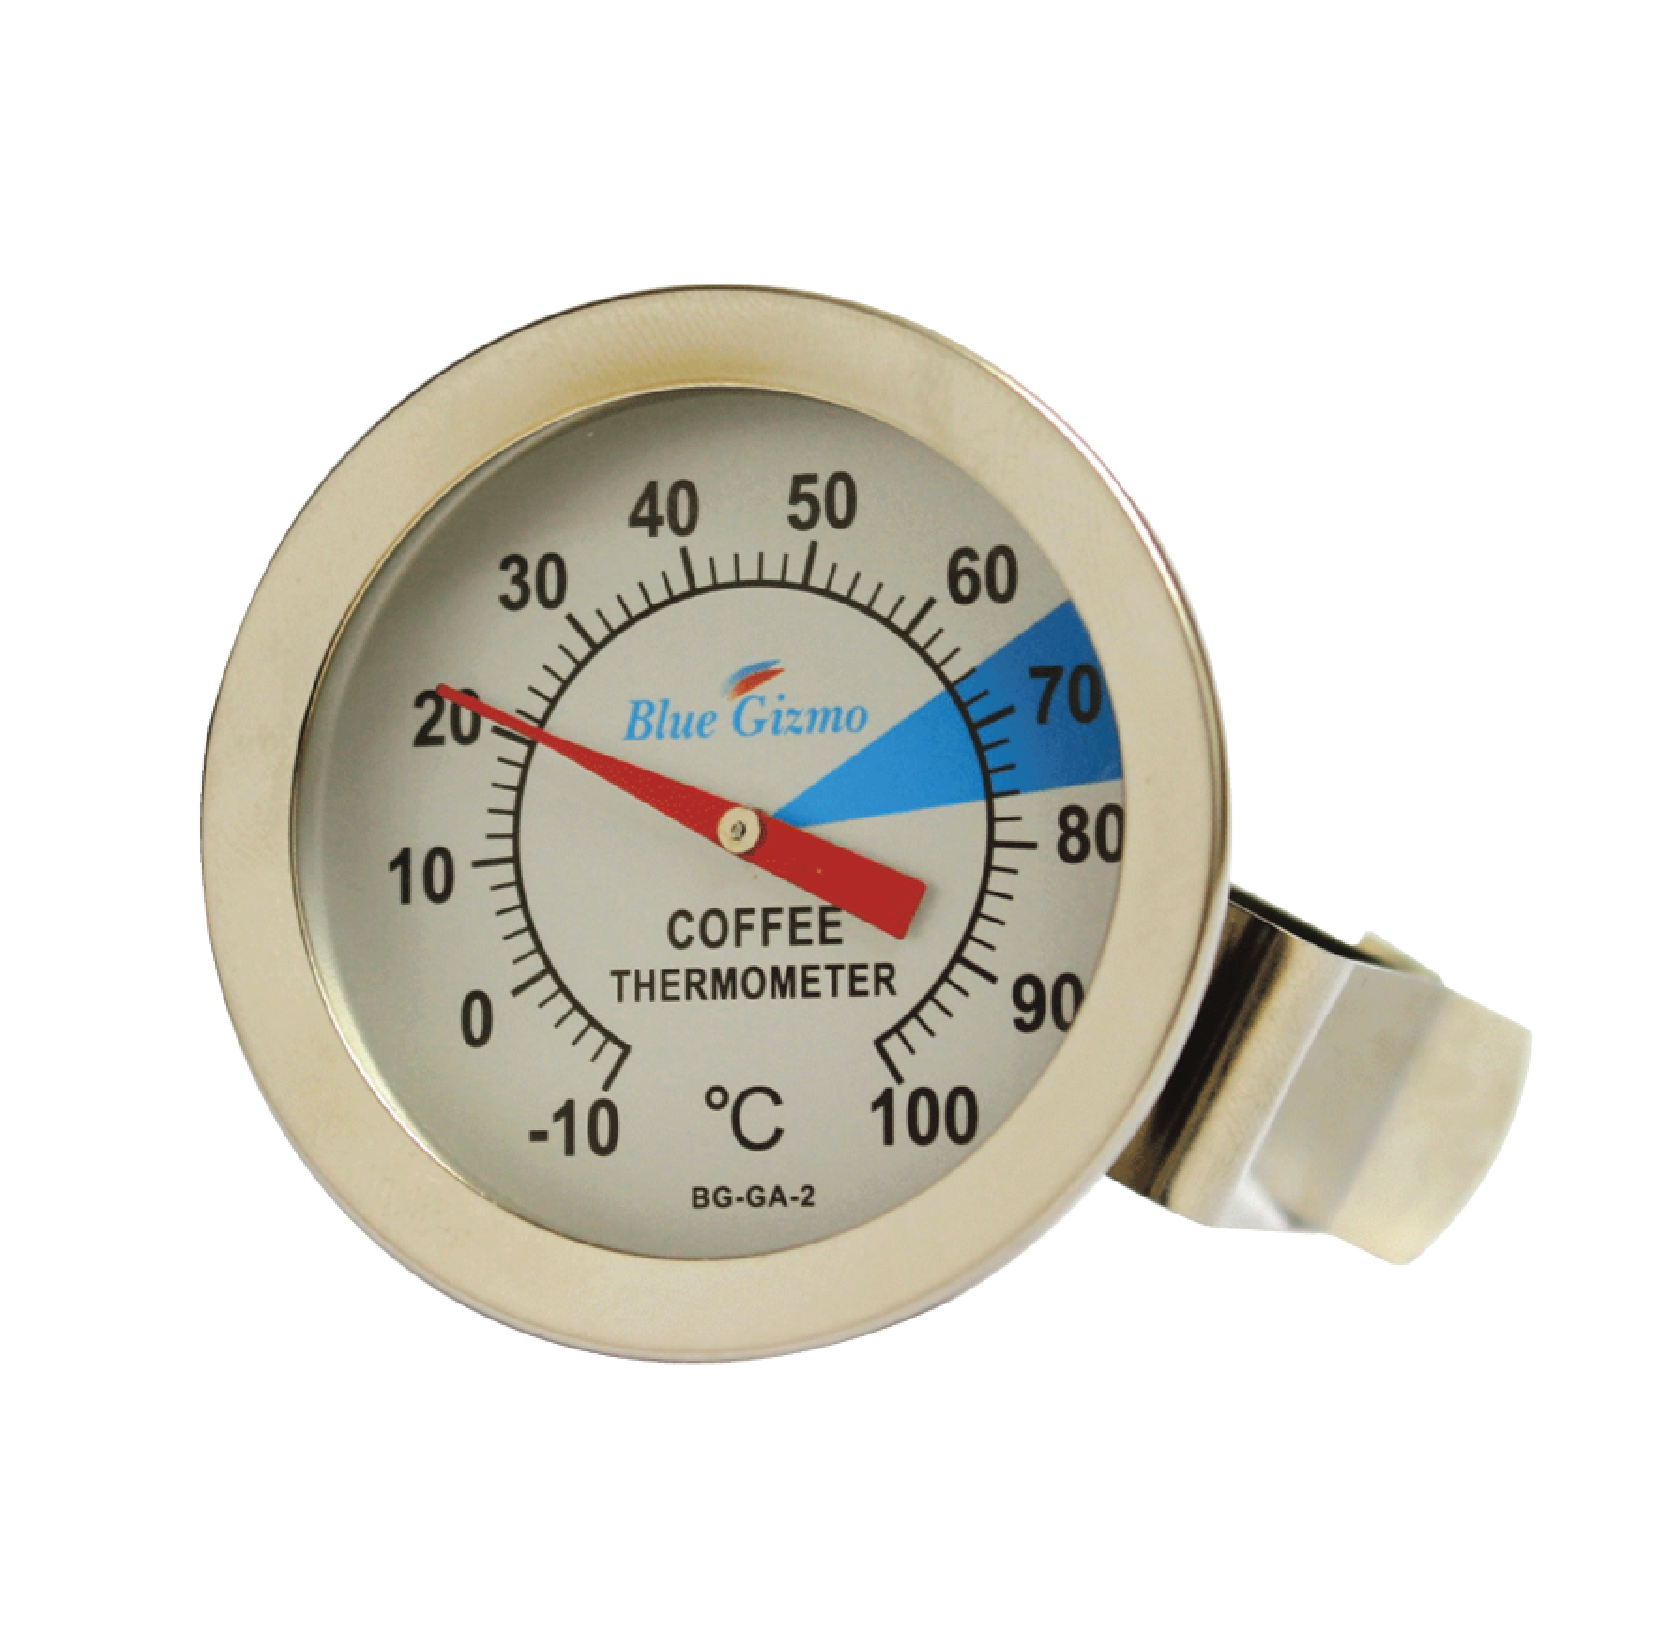 BLUE GIZMO COFFEE THERMOMETER